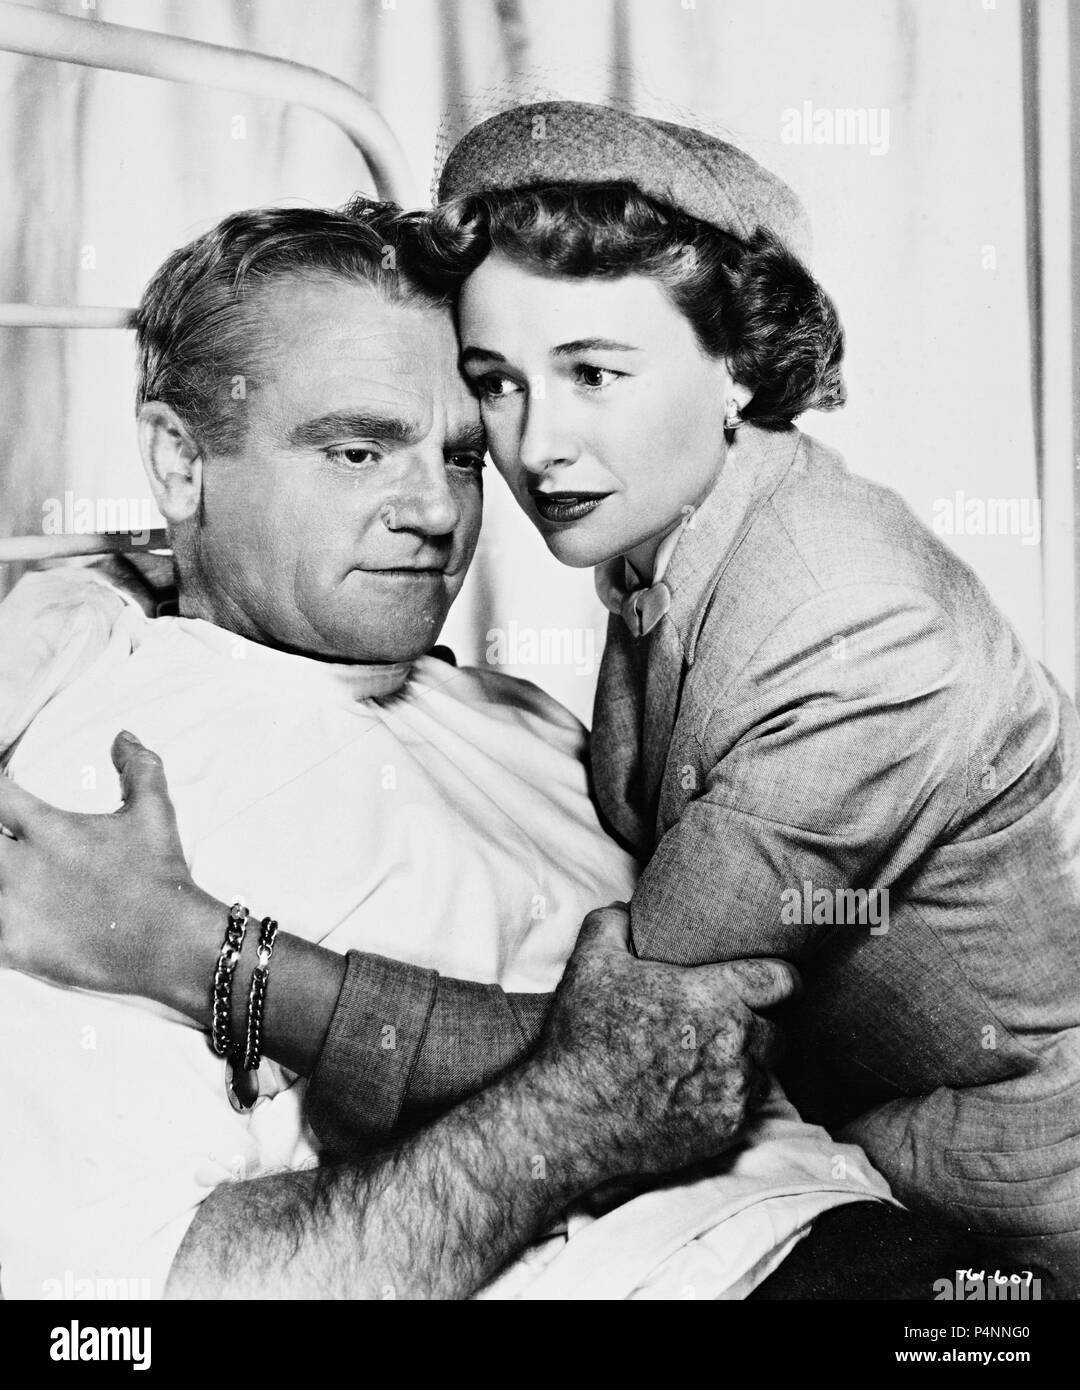 Original Film Title: COME FILL THE CUP.  English Title: COME FILL THE CUP.  Film Director: GORDON DOUGLAS.  Year: 1951.  Stars: JAMES CAGNEY; PHYLLIS THAXTER. Credit: WARNER BROTHERS / Album Stock Photo